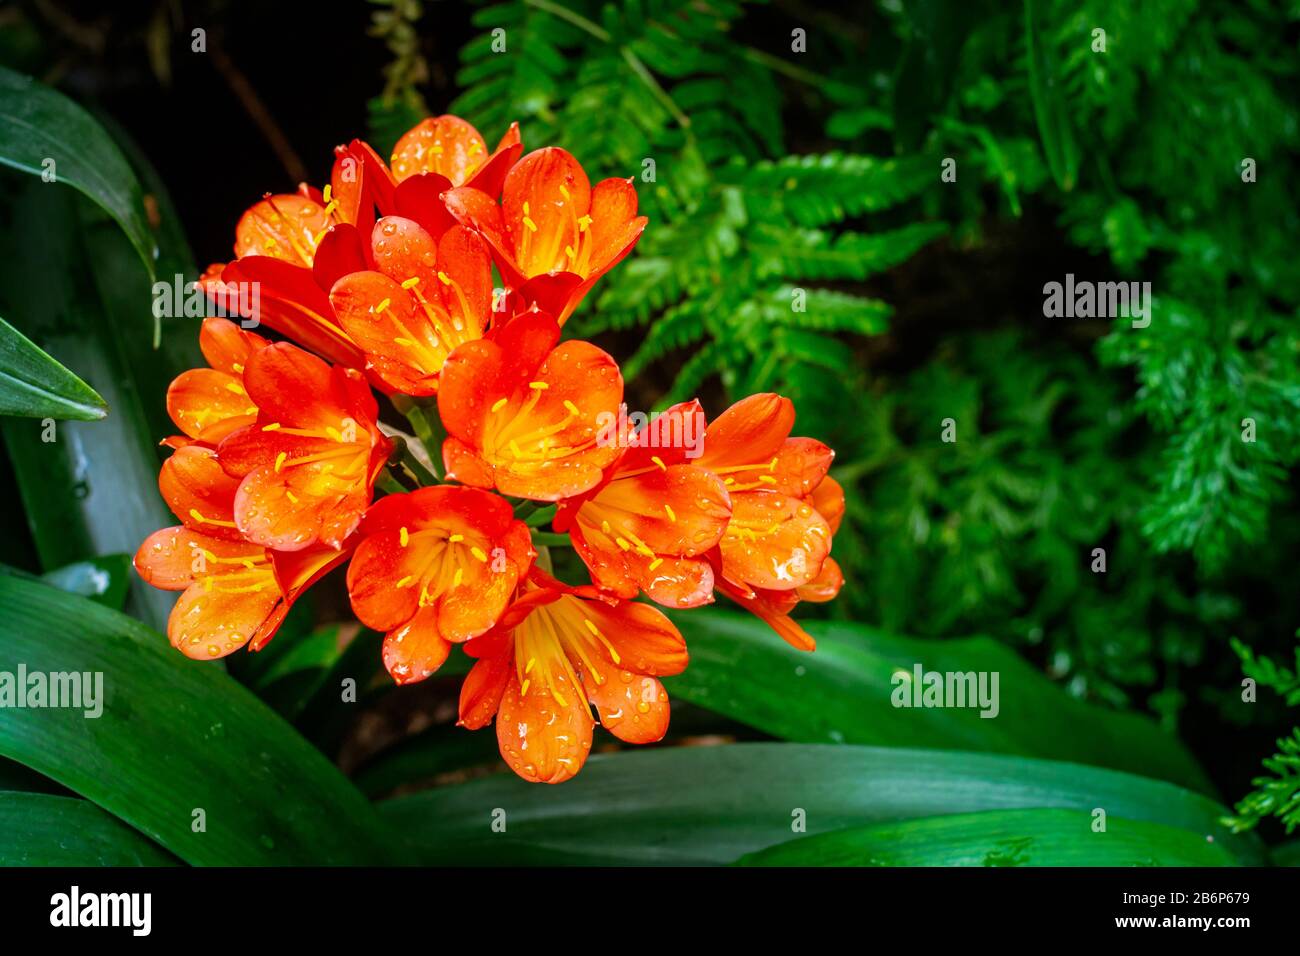 Clivia miniata, also known as Natal lily, bush lily or Kaffir lily, an evergreen perenial native to South Africa with striking orange, fiery, trumpet- Stock Photo